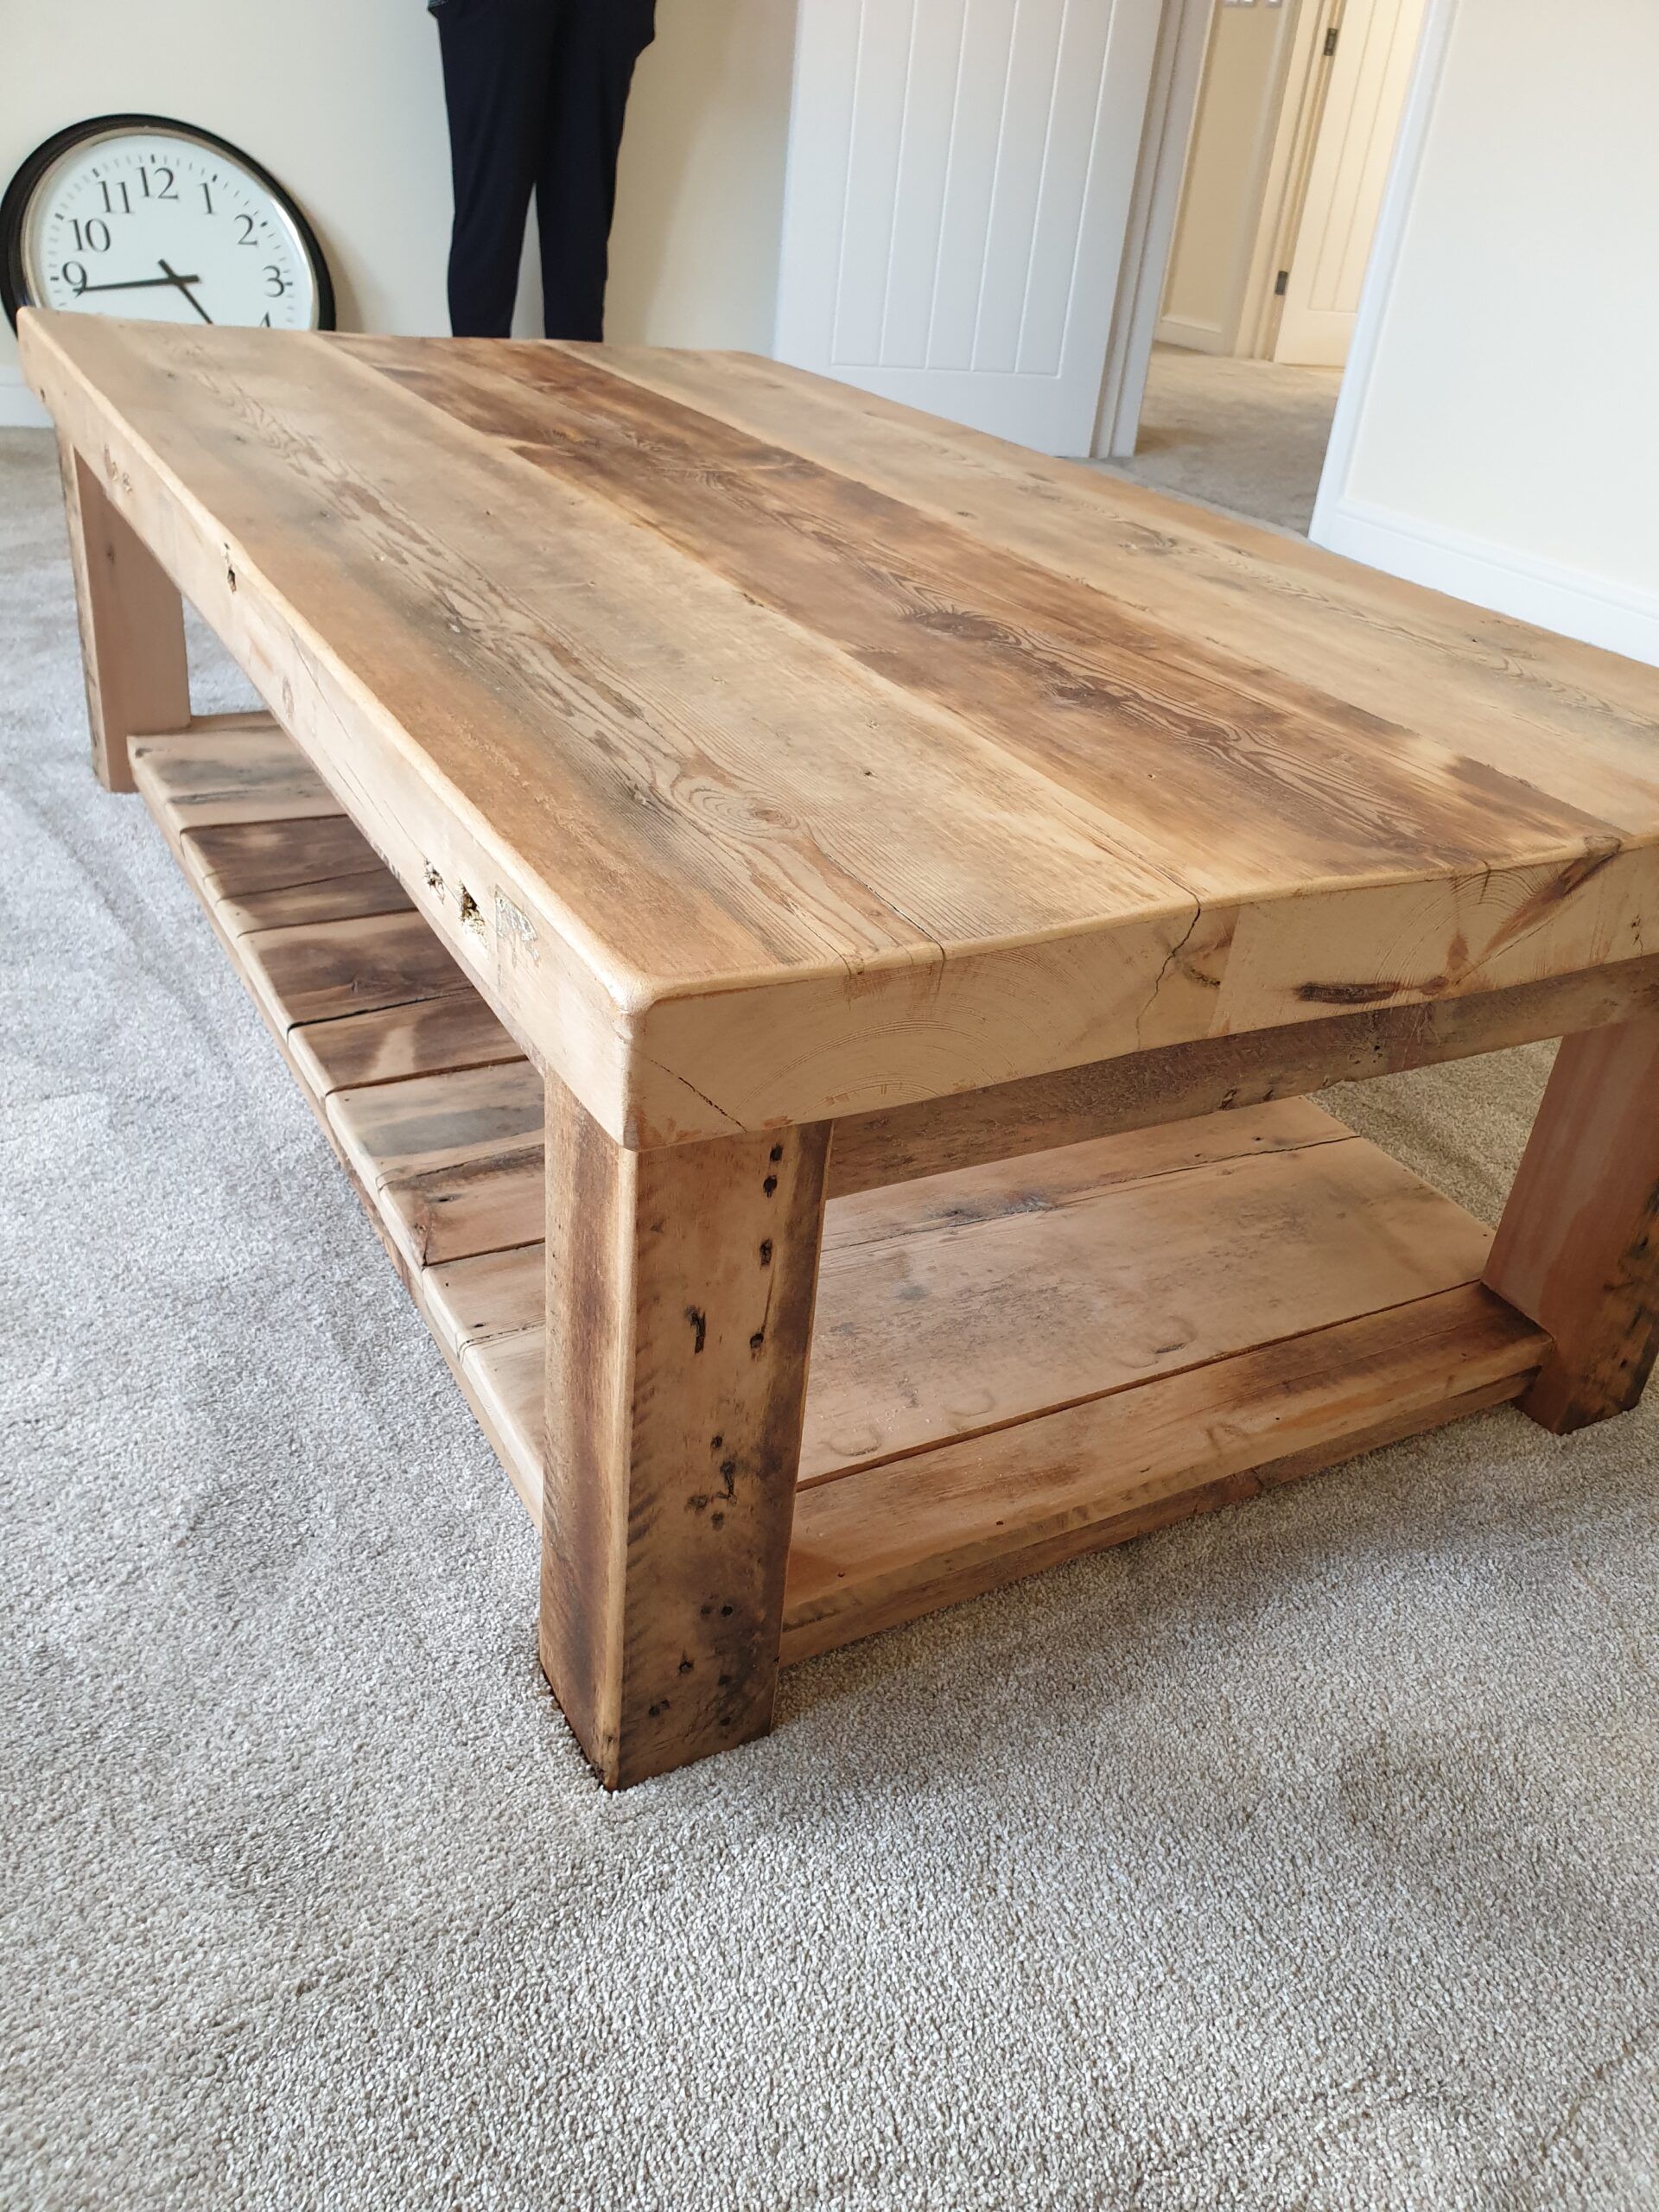 Buy Rustic Wood Coffee Table Made From Reclaimed Timber With Rustic Wood Coffee Tables (Gallery 2 of 21)